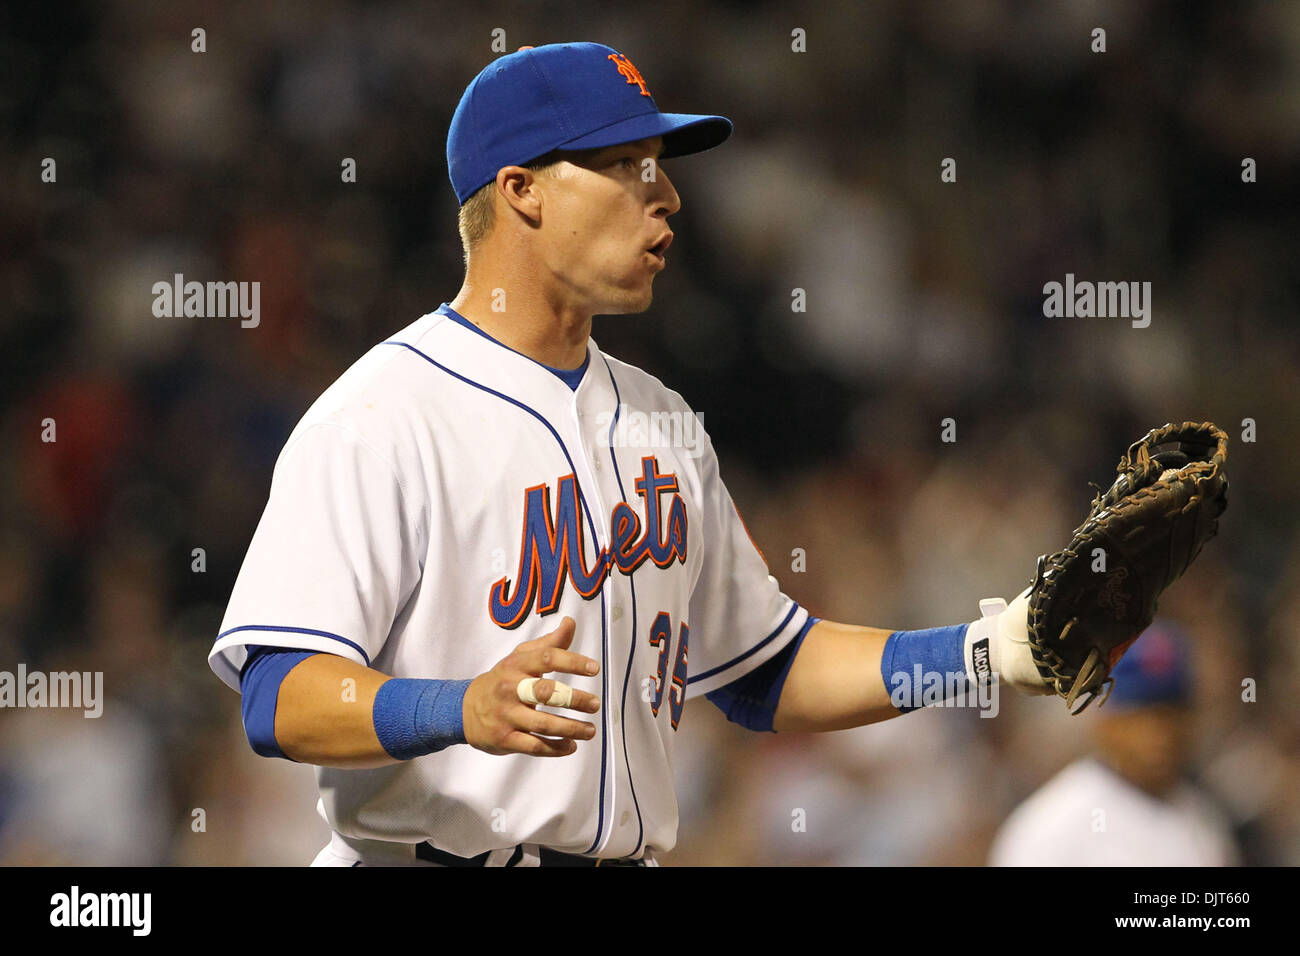 NY Mets Infielder Mike Jacobs  (#35) doesnt like the call in the game at Citifield  in Flushing, NY. The Marlins defeated the Mets 7-6. (Credit Image: © Anthony Gruppuso/Southcreek Global/ZUMApress.com) Stock Photo